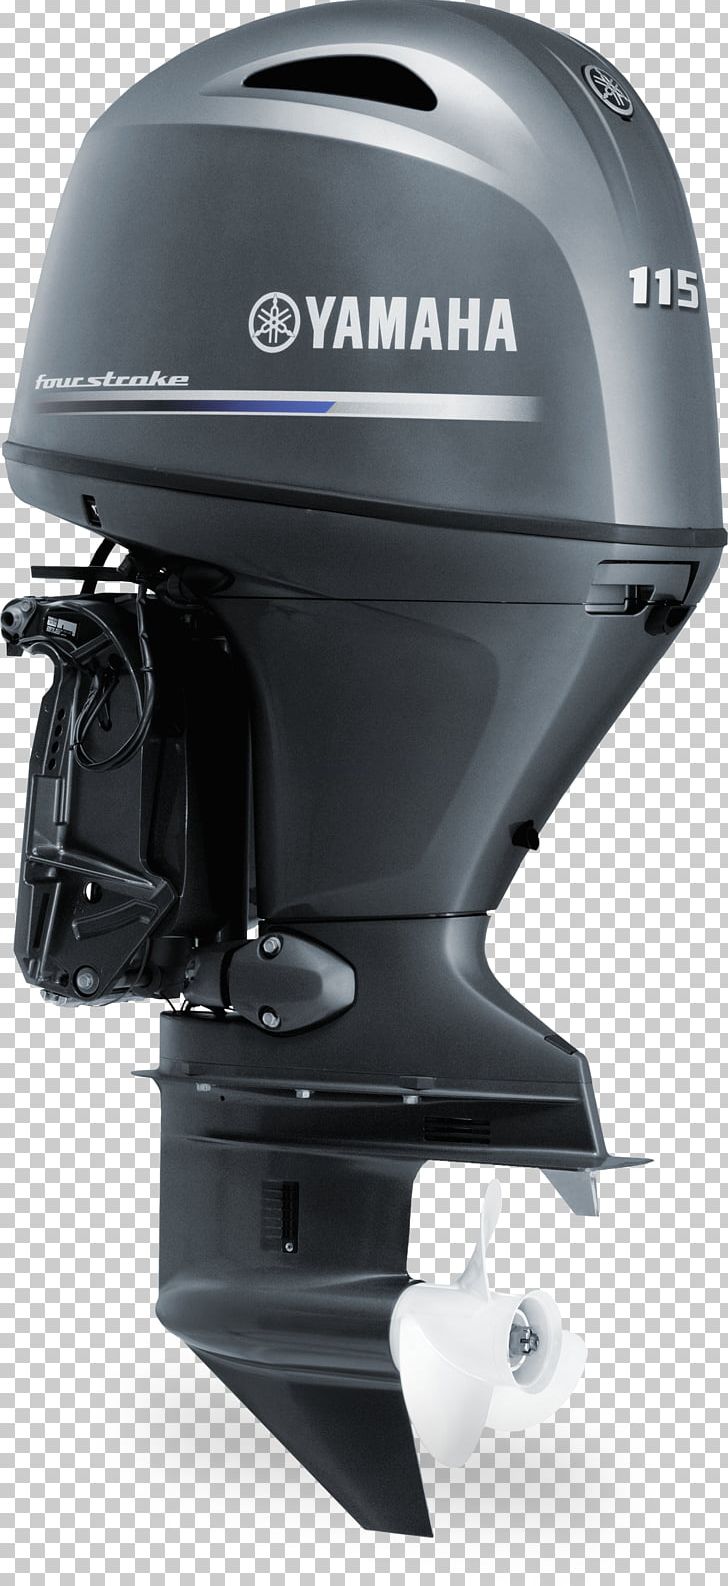 Yamaha Motor Company Outboard Motor Four-stroke Engine Boat PNG, Clipart, Allterrain Vehicle, Engine, Motorcycle Helmet, Outboard Motor, Personal Protective Equipment Free PNG Download